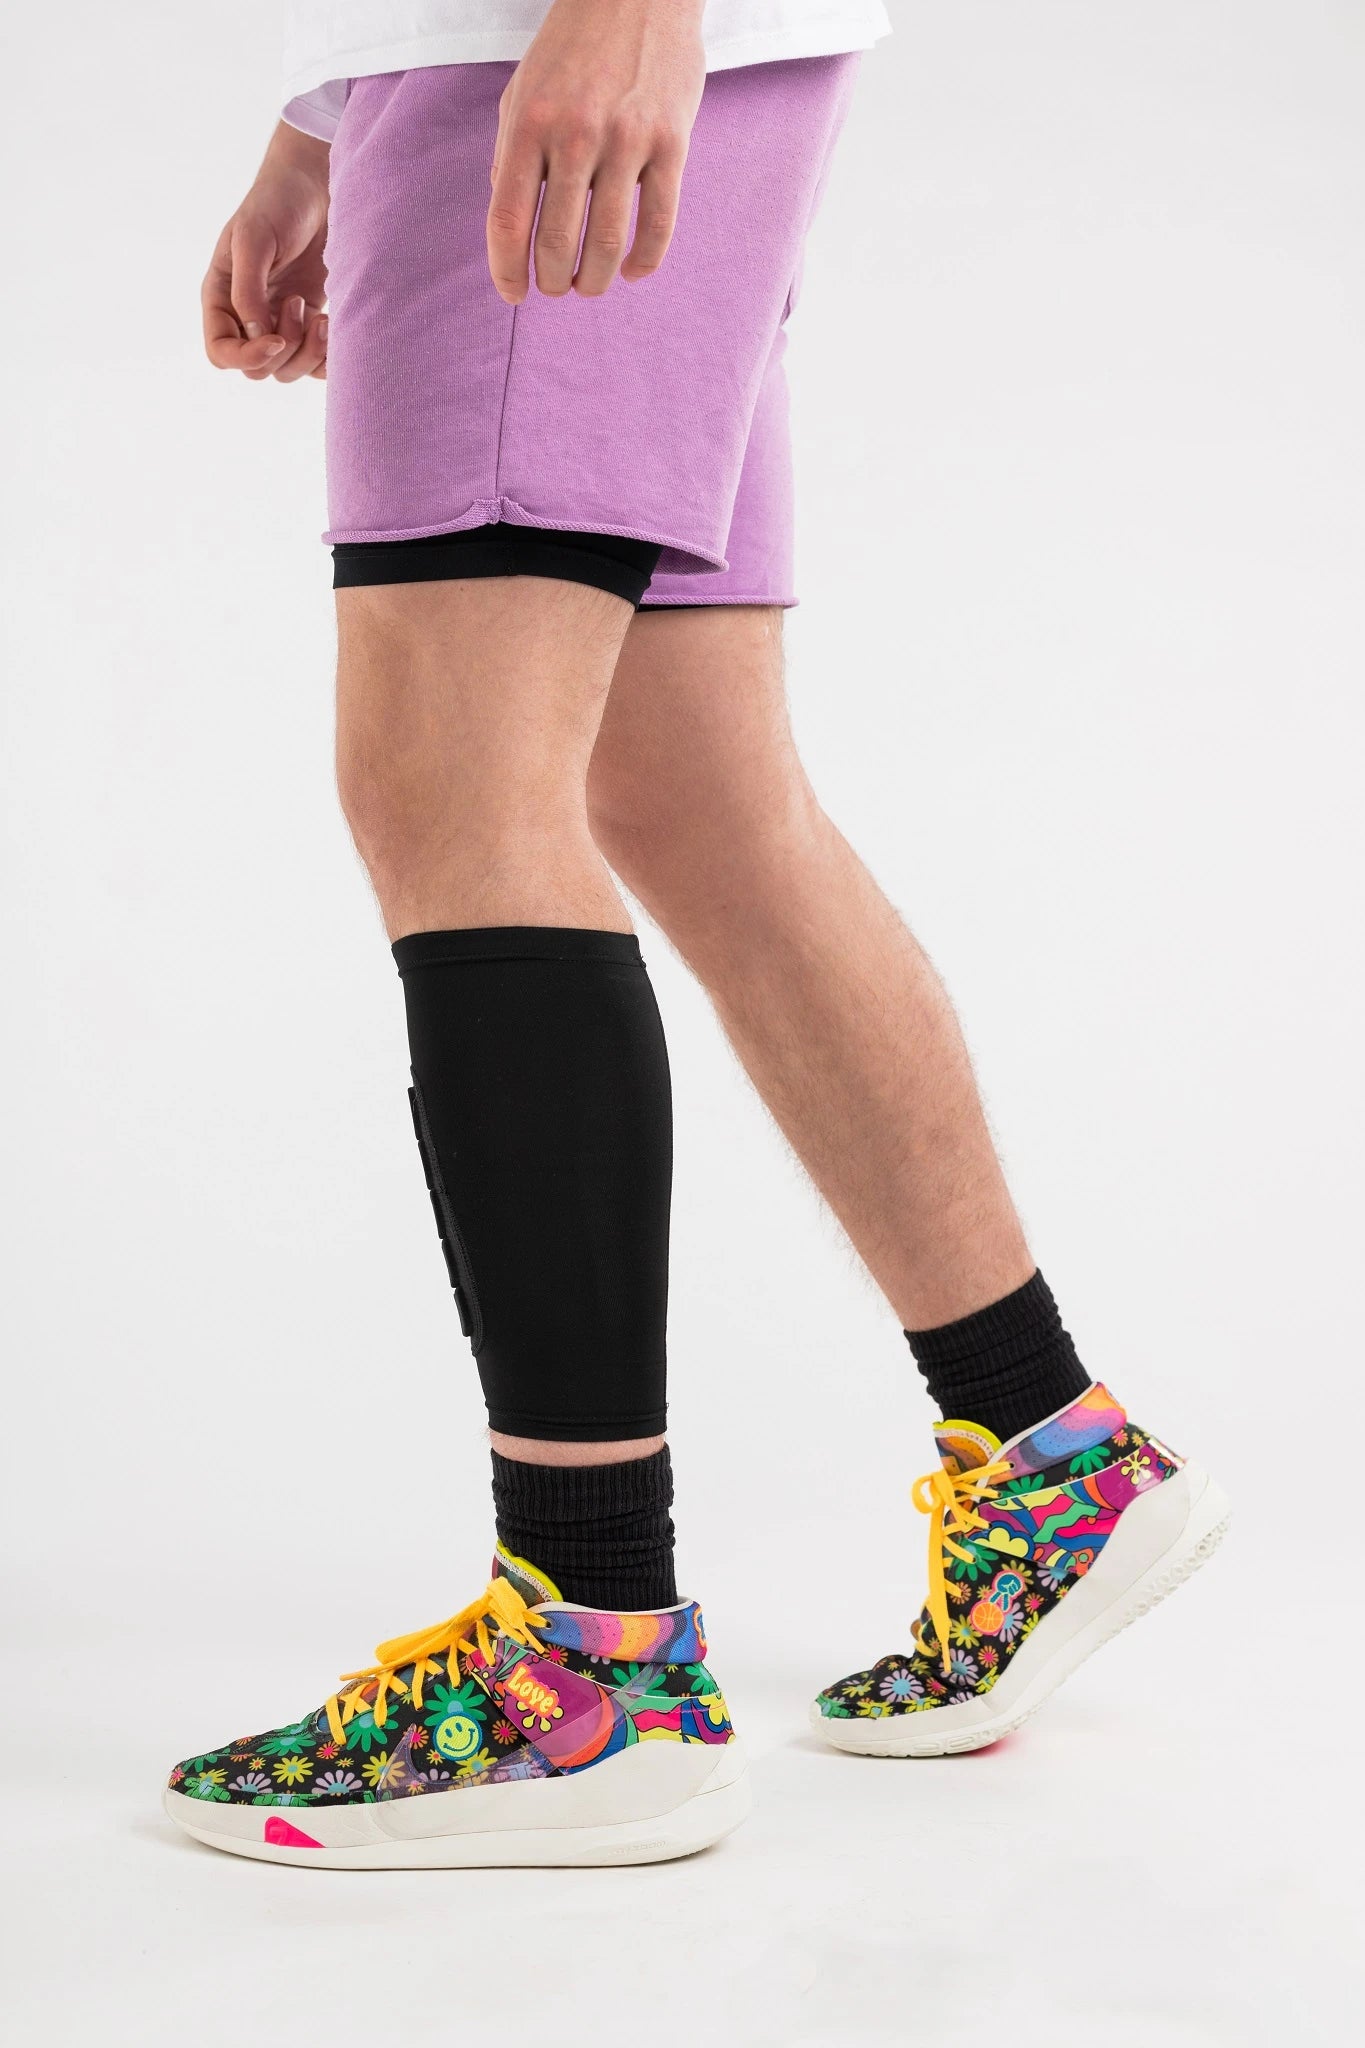 padded calf sleeve, padded calf sleeve Suppliers and Manufacturers